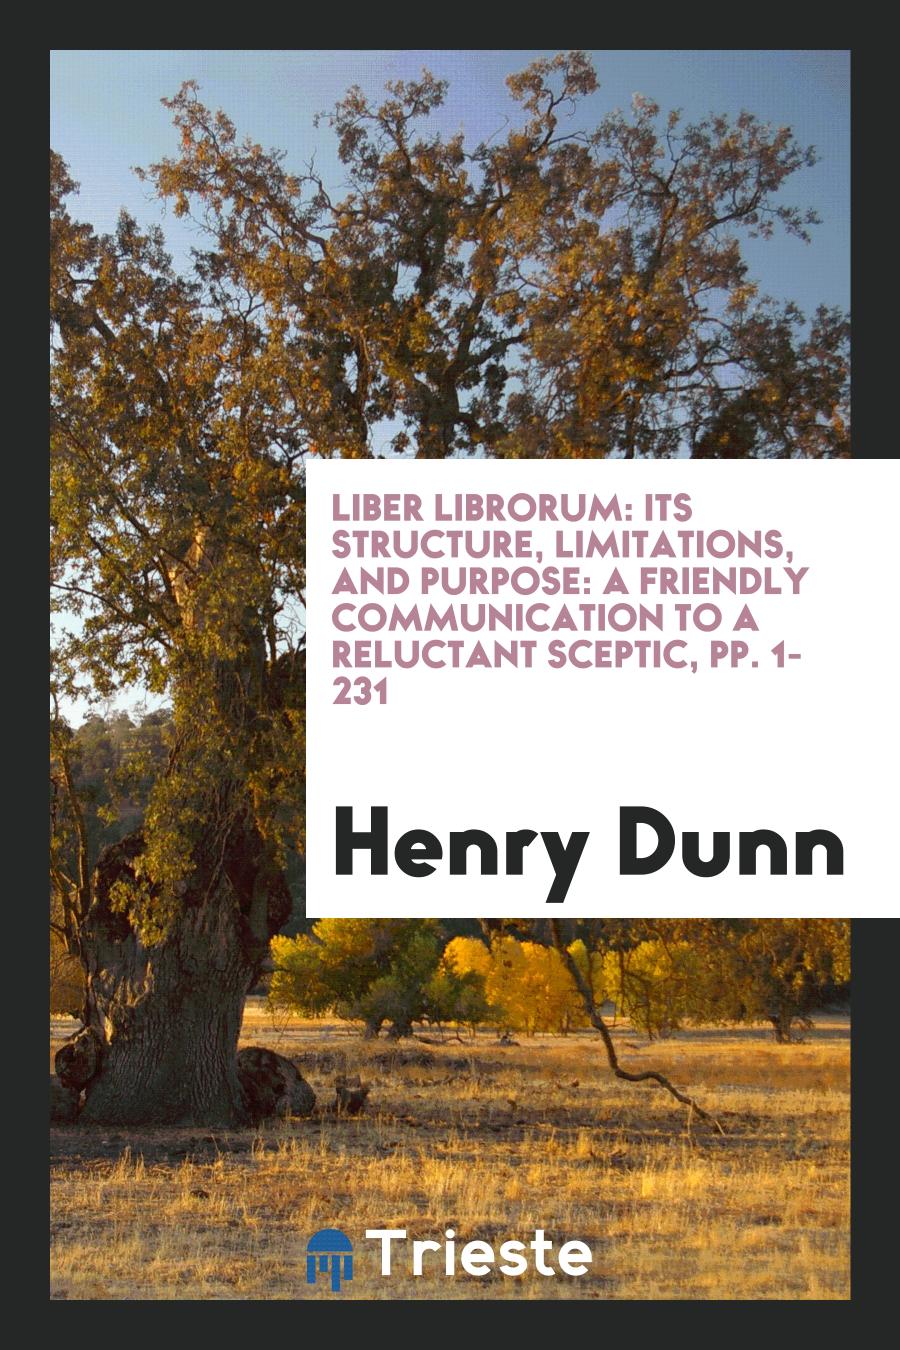 Liber Librorum: Its Structure, Limitations, and Purpose: A Friendly Communication to a Reluctant Sceptic, pp. 1-231